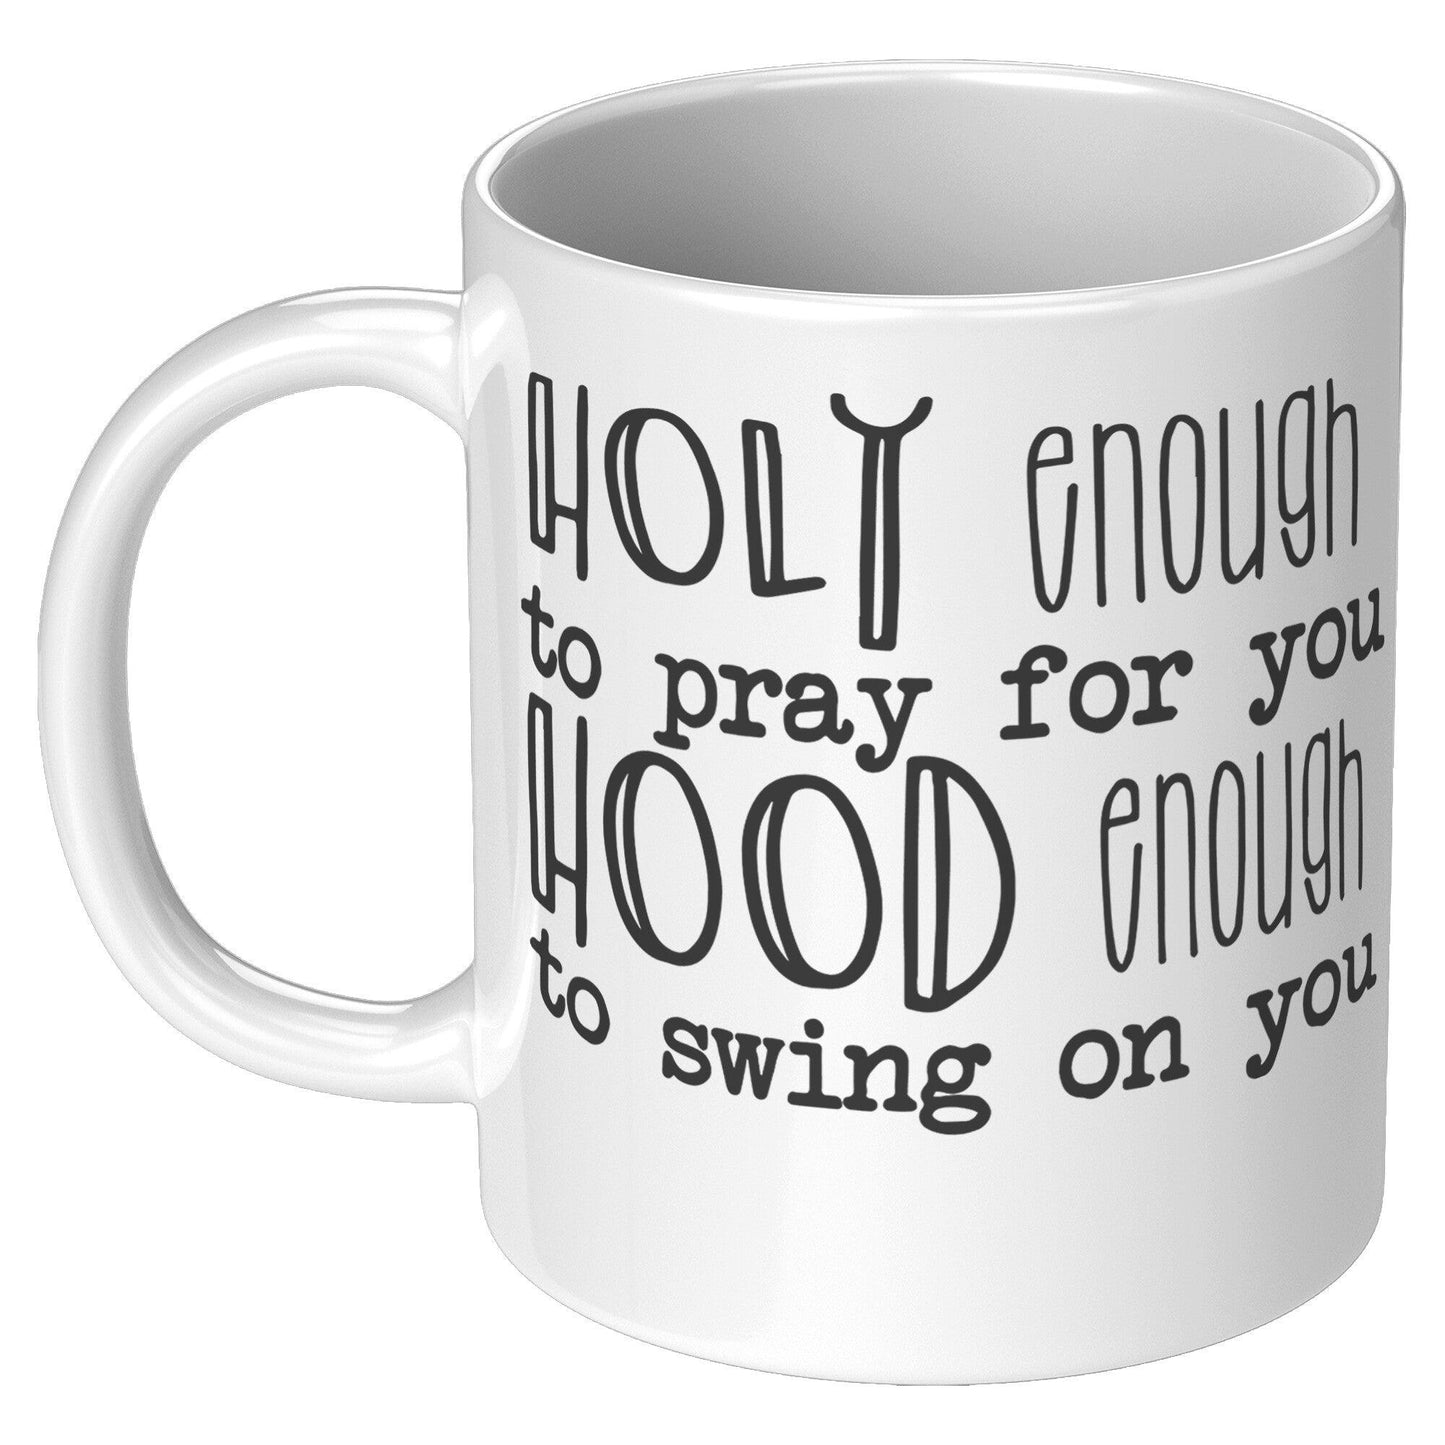 Holy Enough To Pray For You Hood Enough To Swing On You White Mug - TheGivenGet